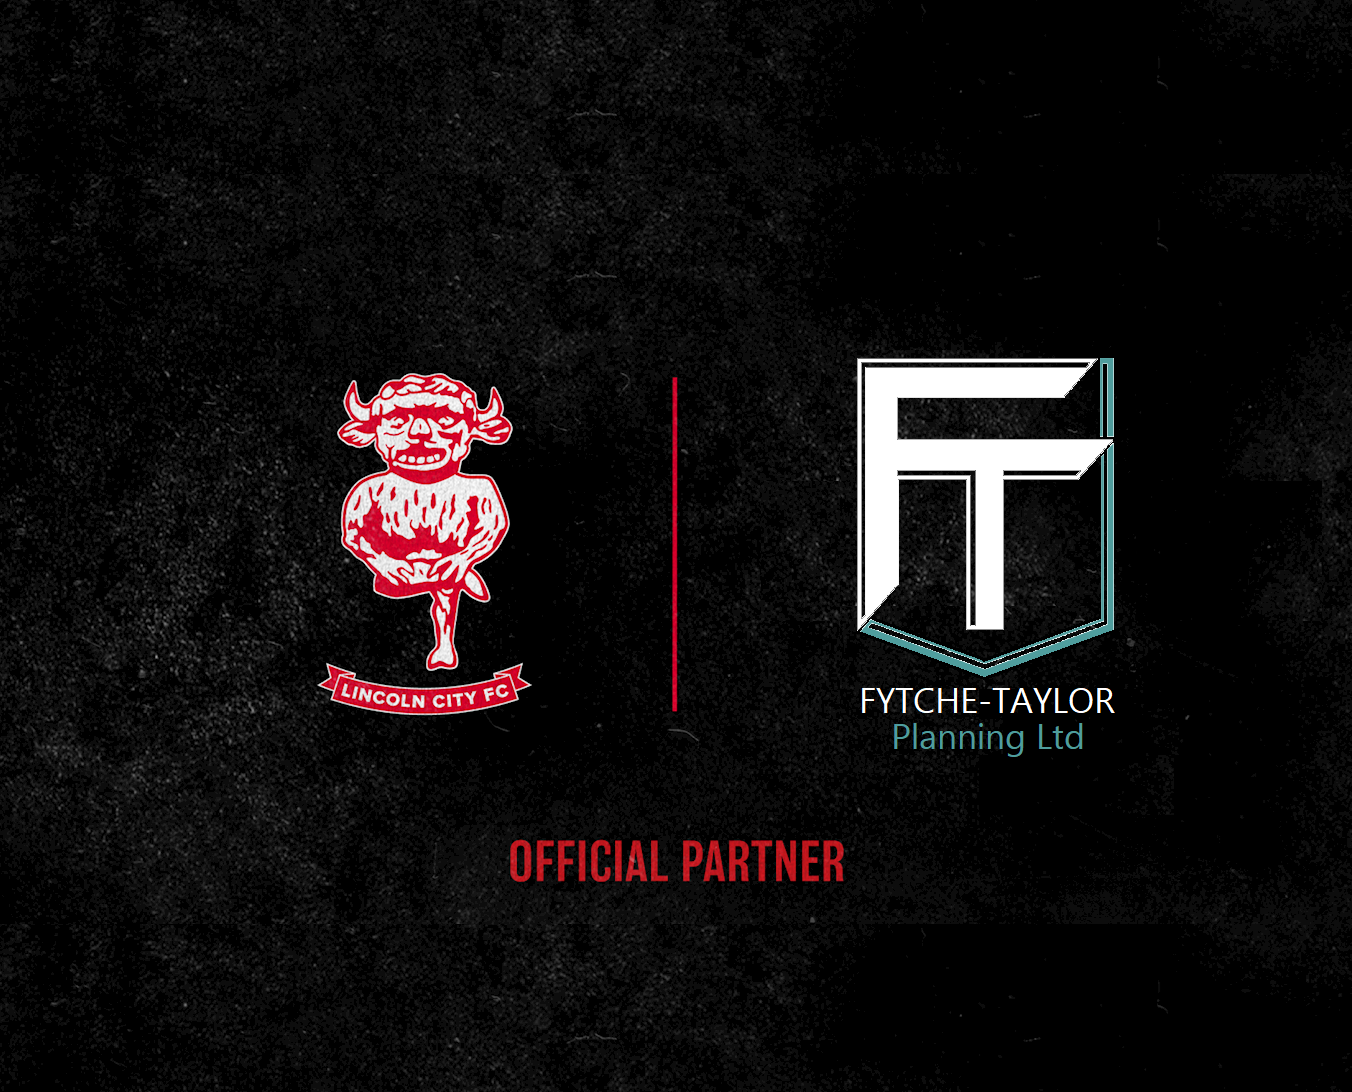 Fytche-Taylor Planning Ltd have become a new silver partner of the Imps